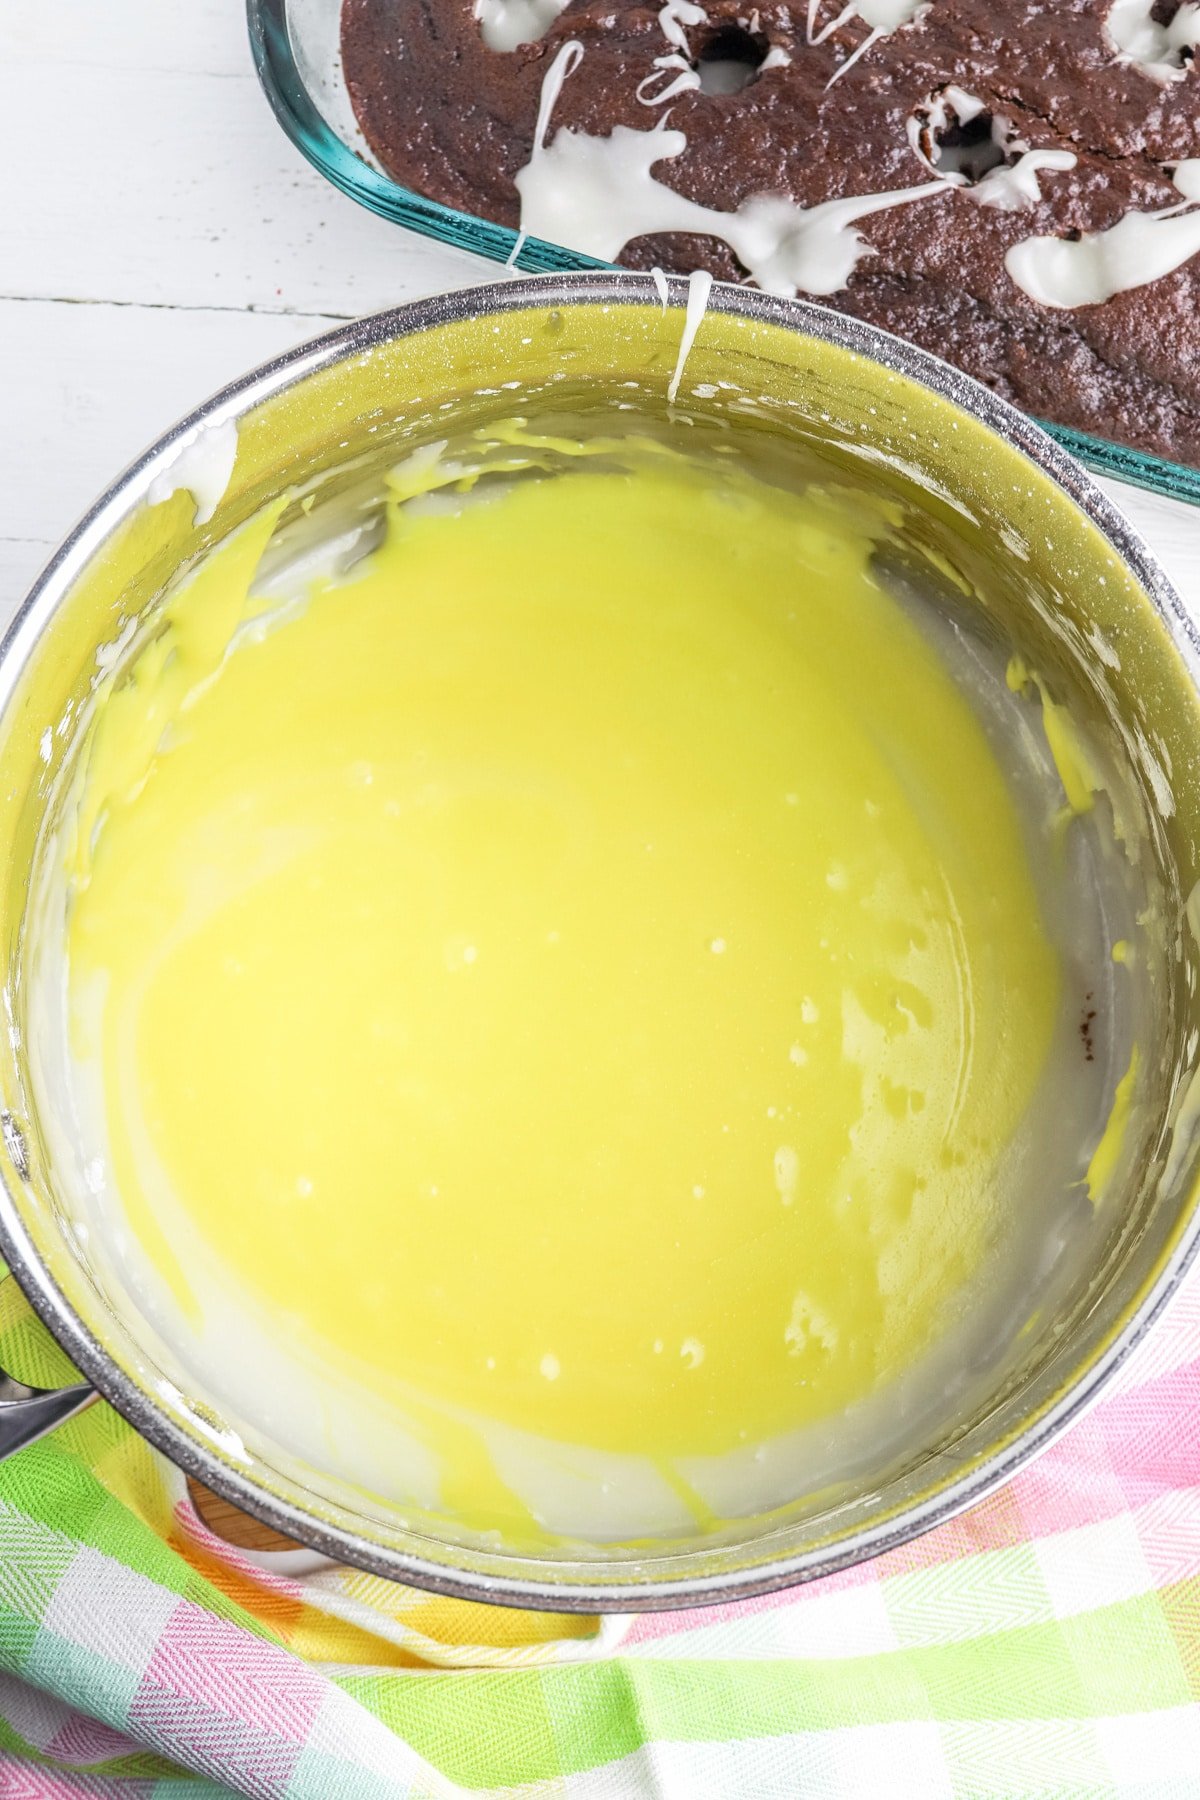 Add yellow food coloring